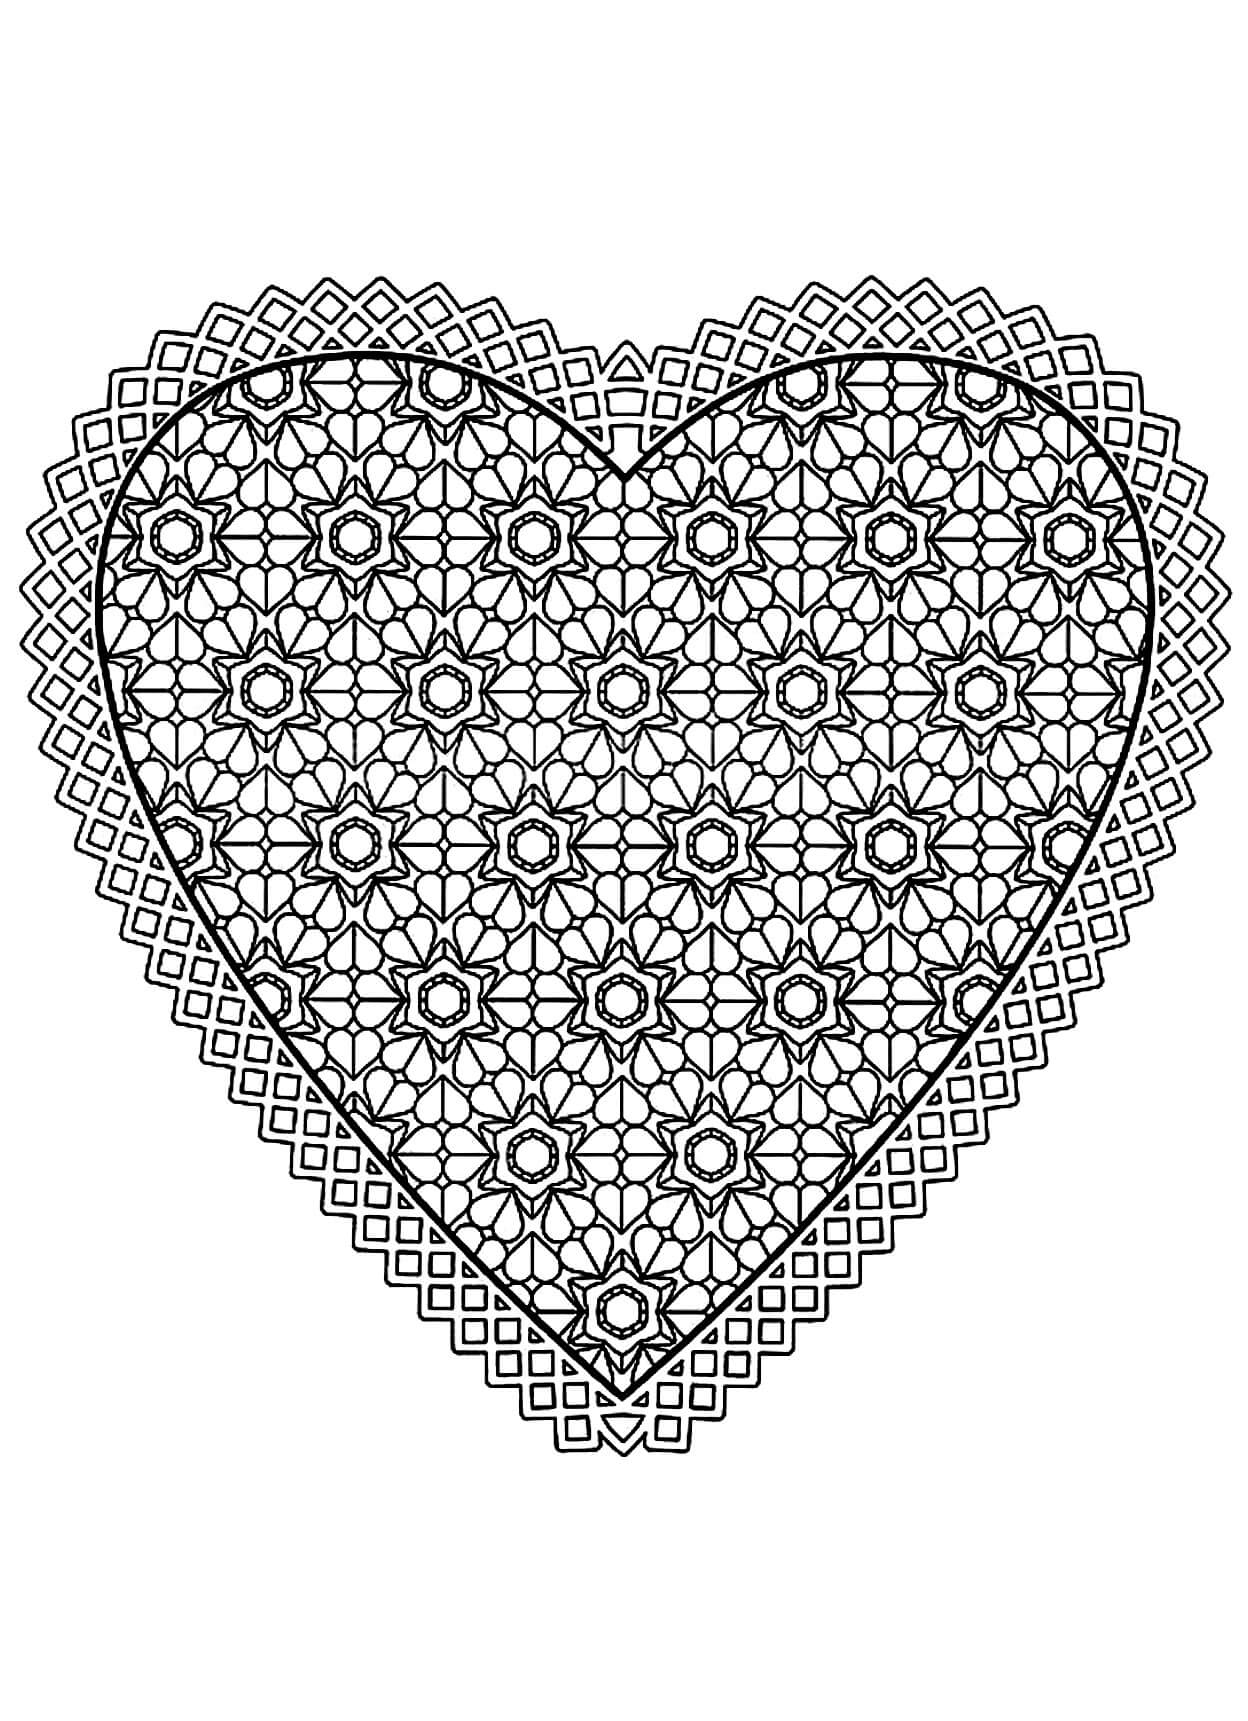 mandala-free-heart-coloring-page-download-print-now